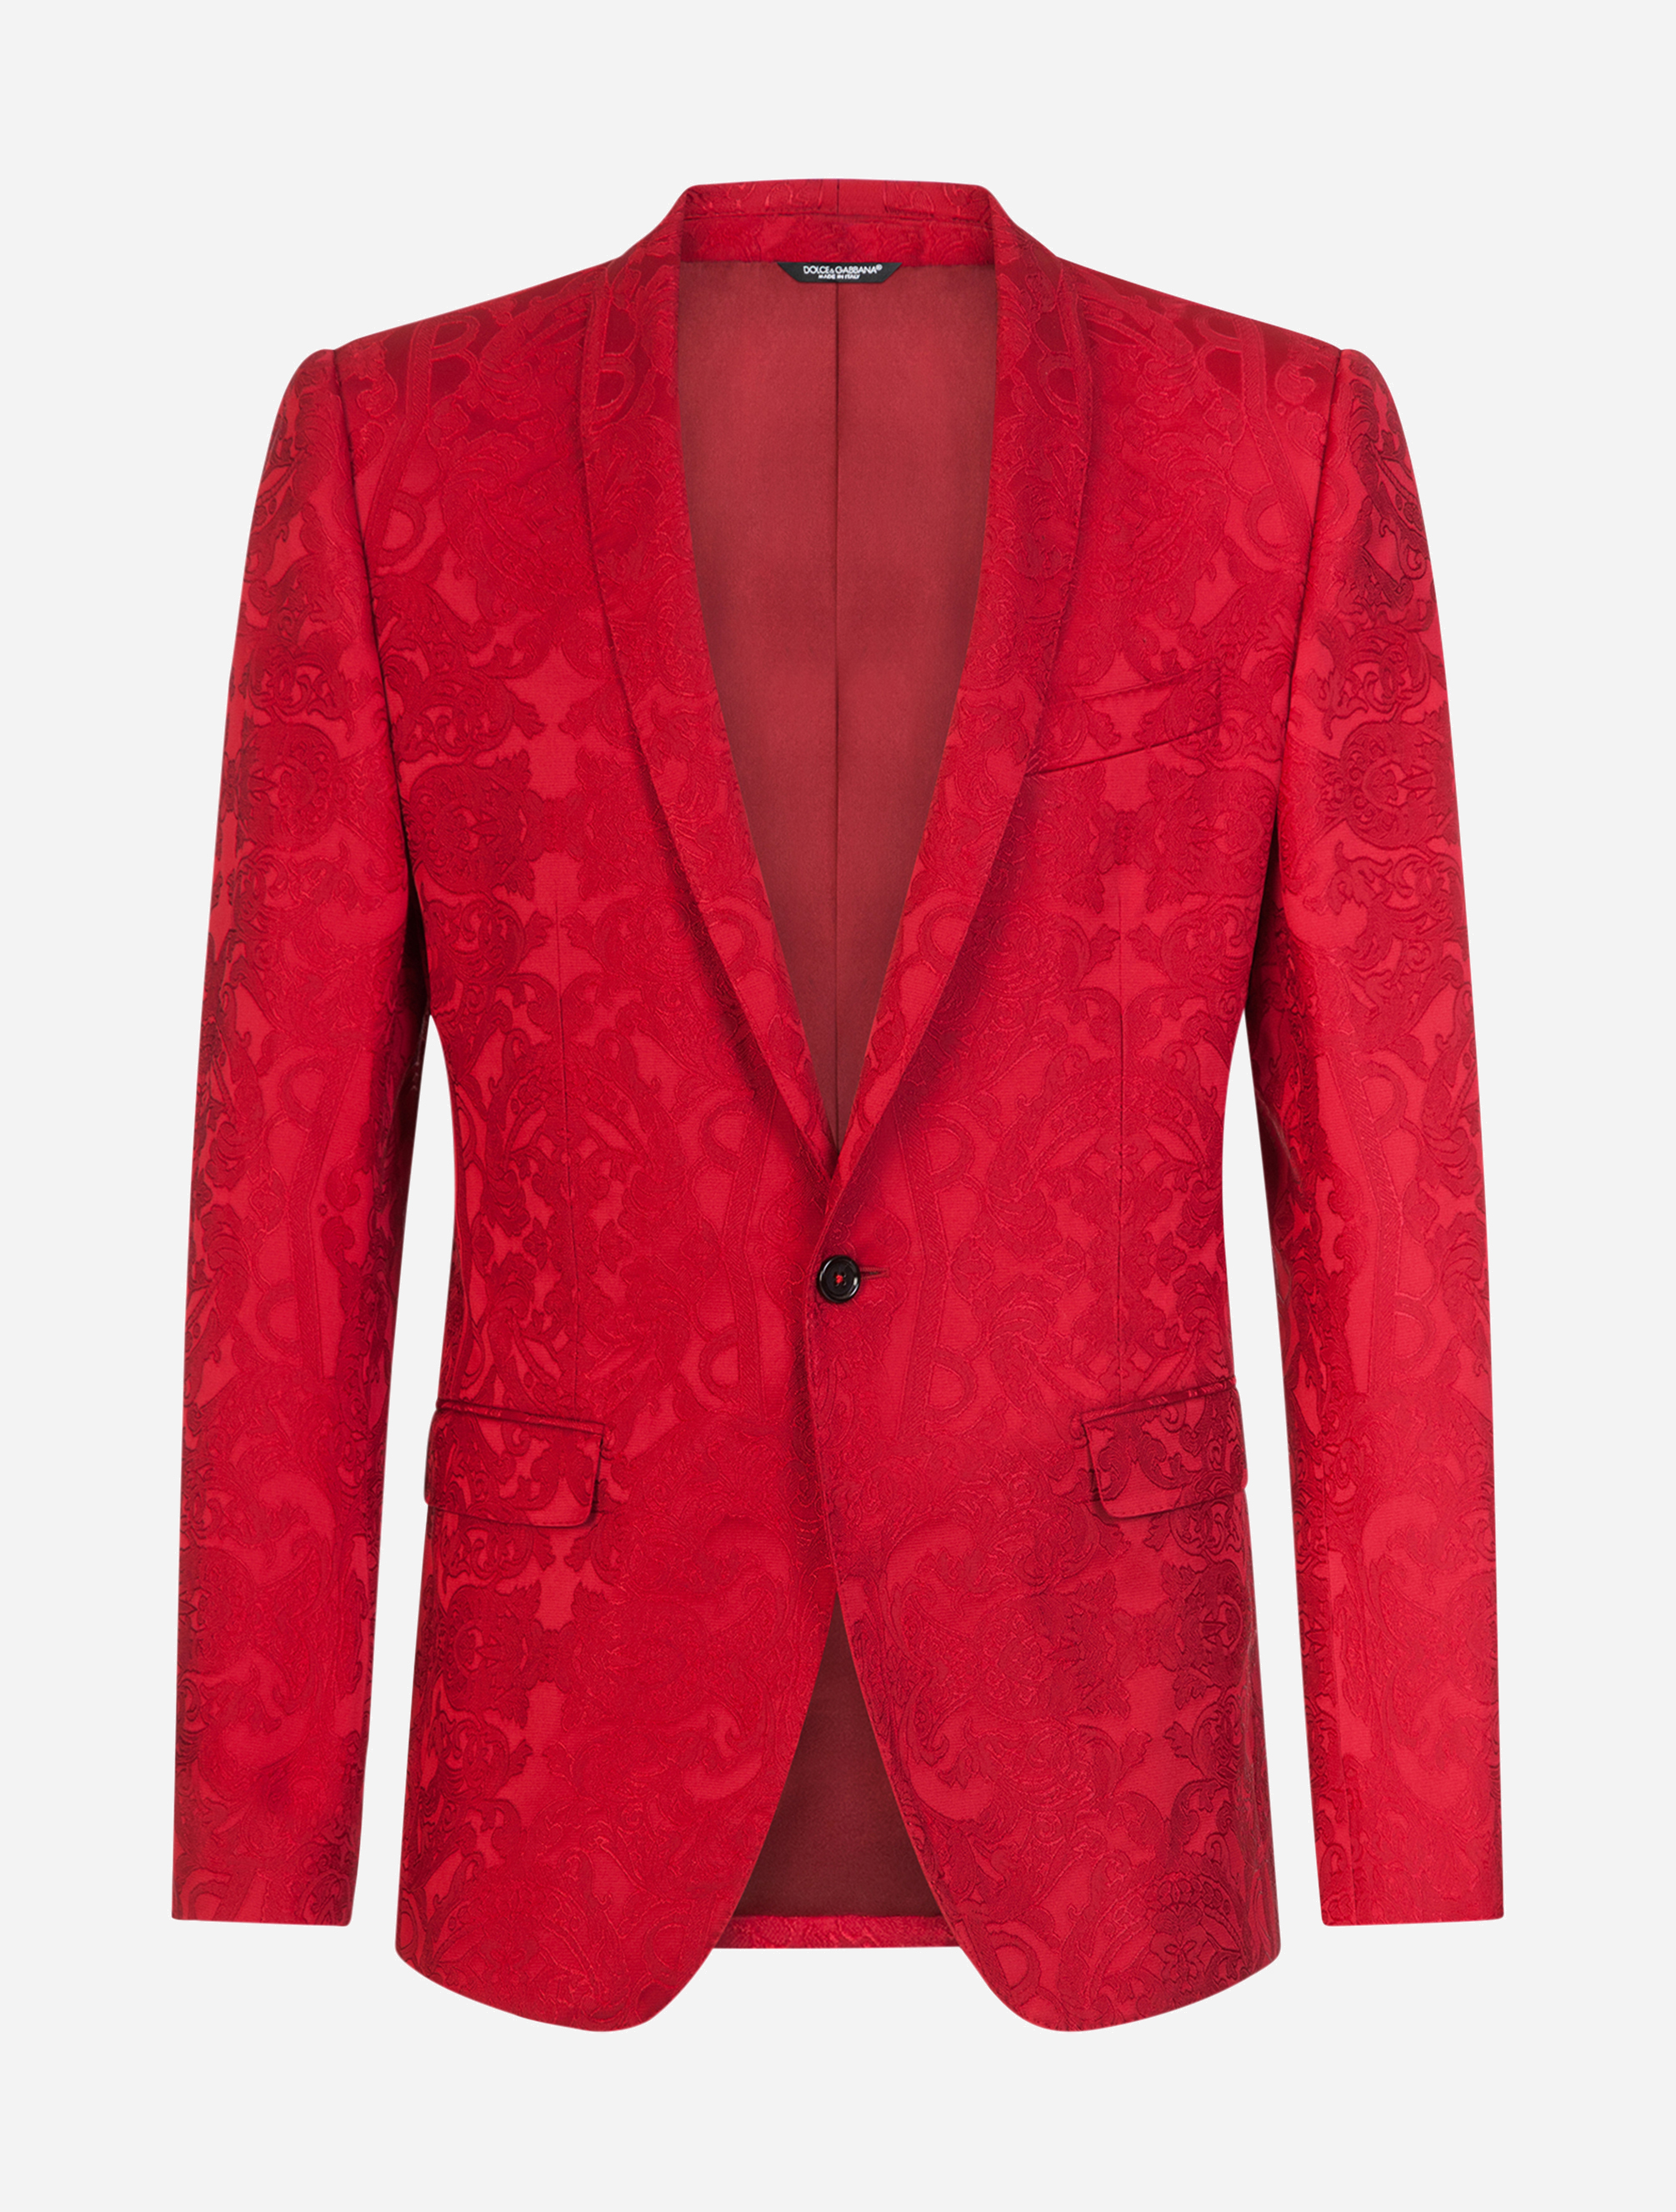 dolce and gabbana mens suits